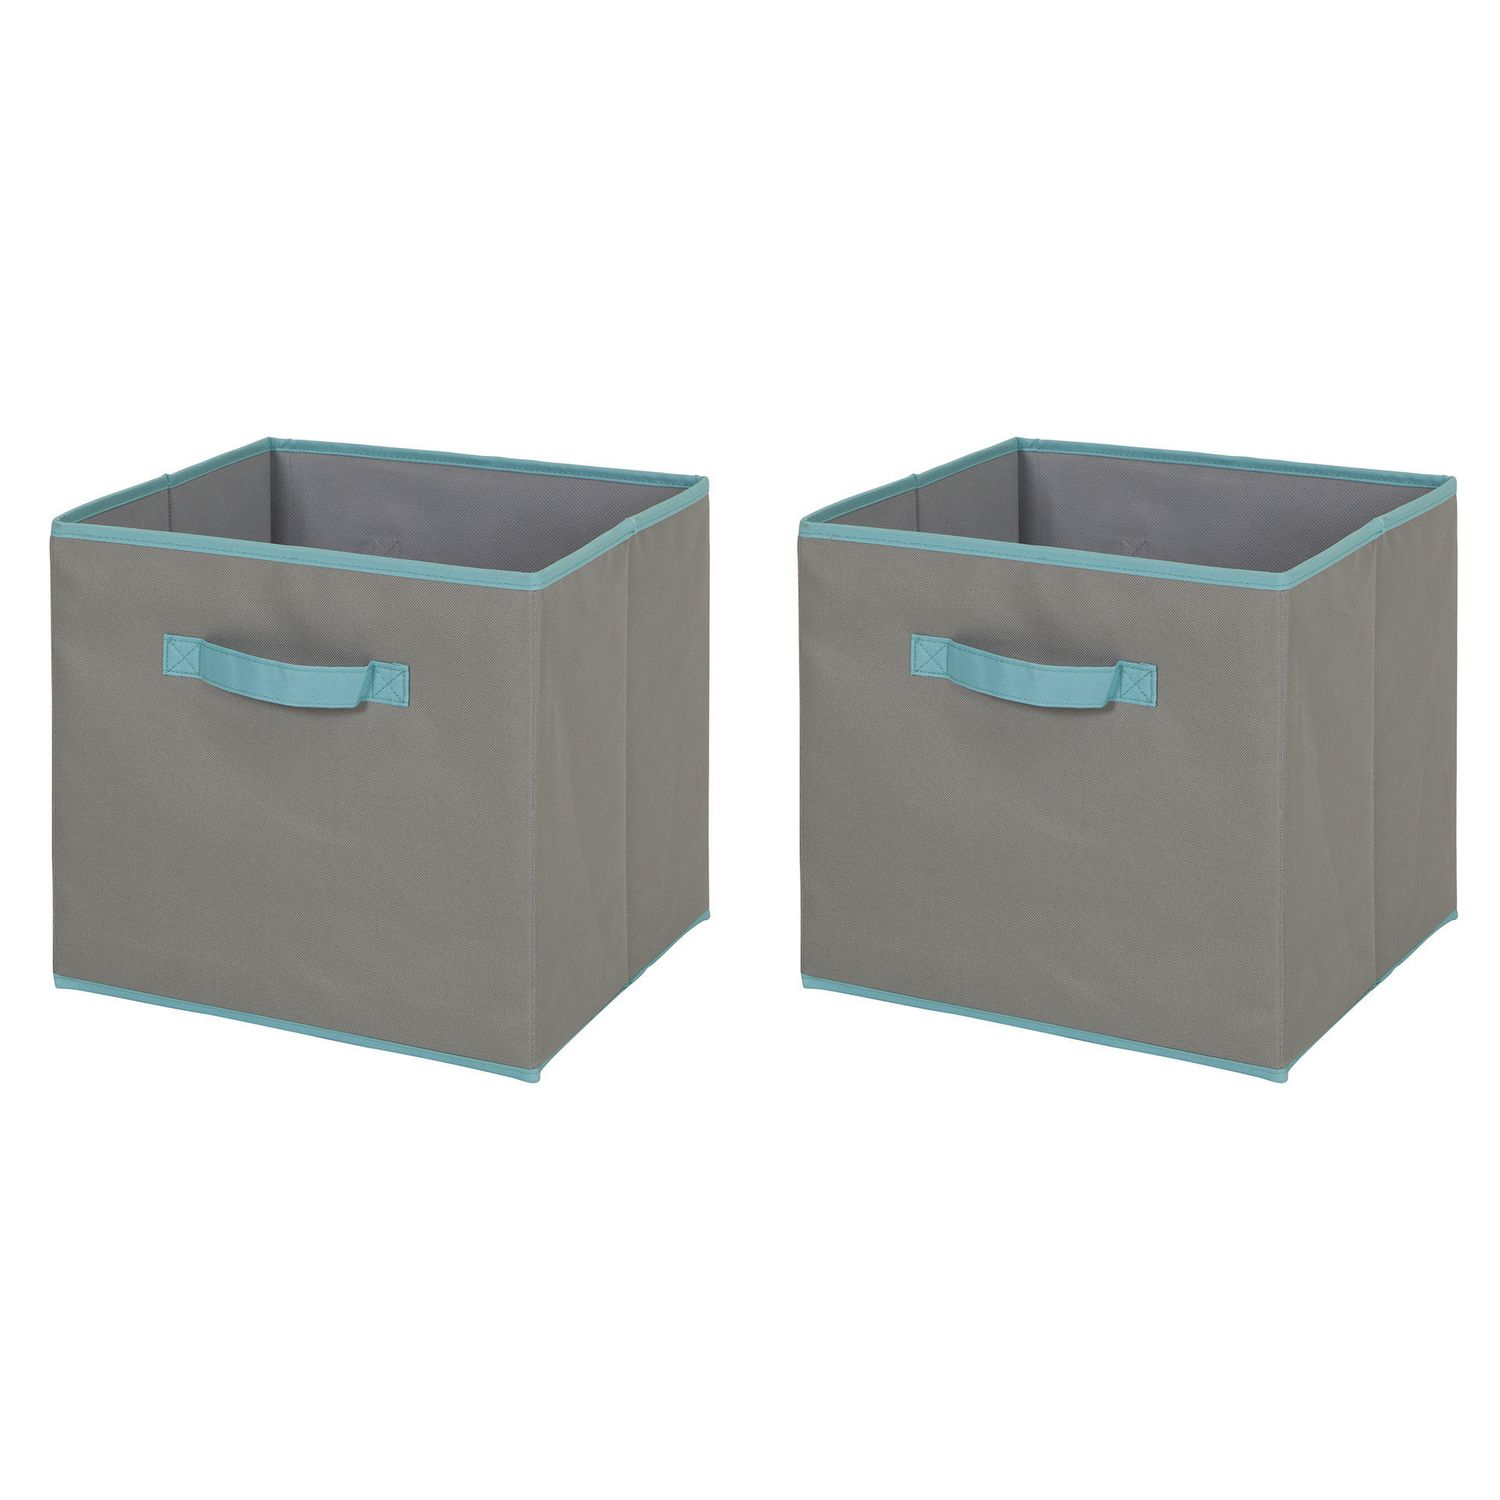 South Shore Fabric Storage Bin 2 Pack Large Size Walmart Canada in dimensions 1500 X 1500